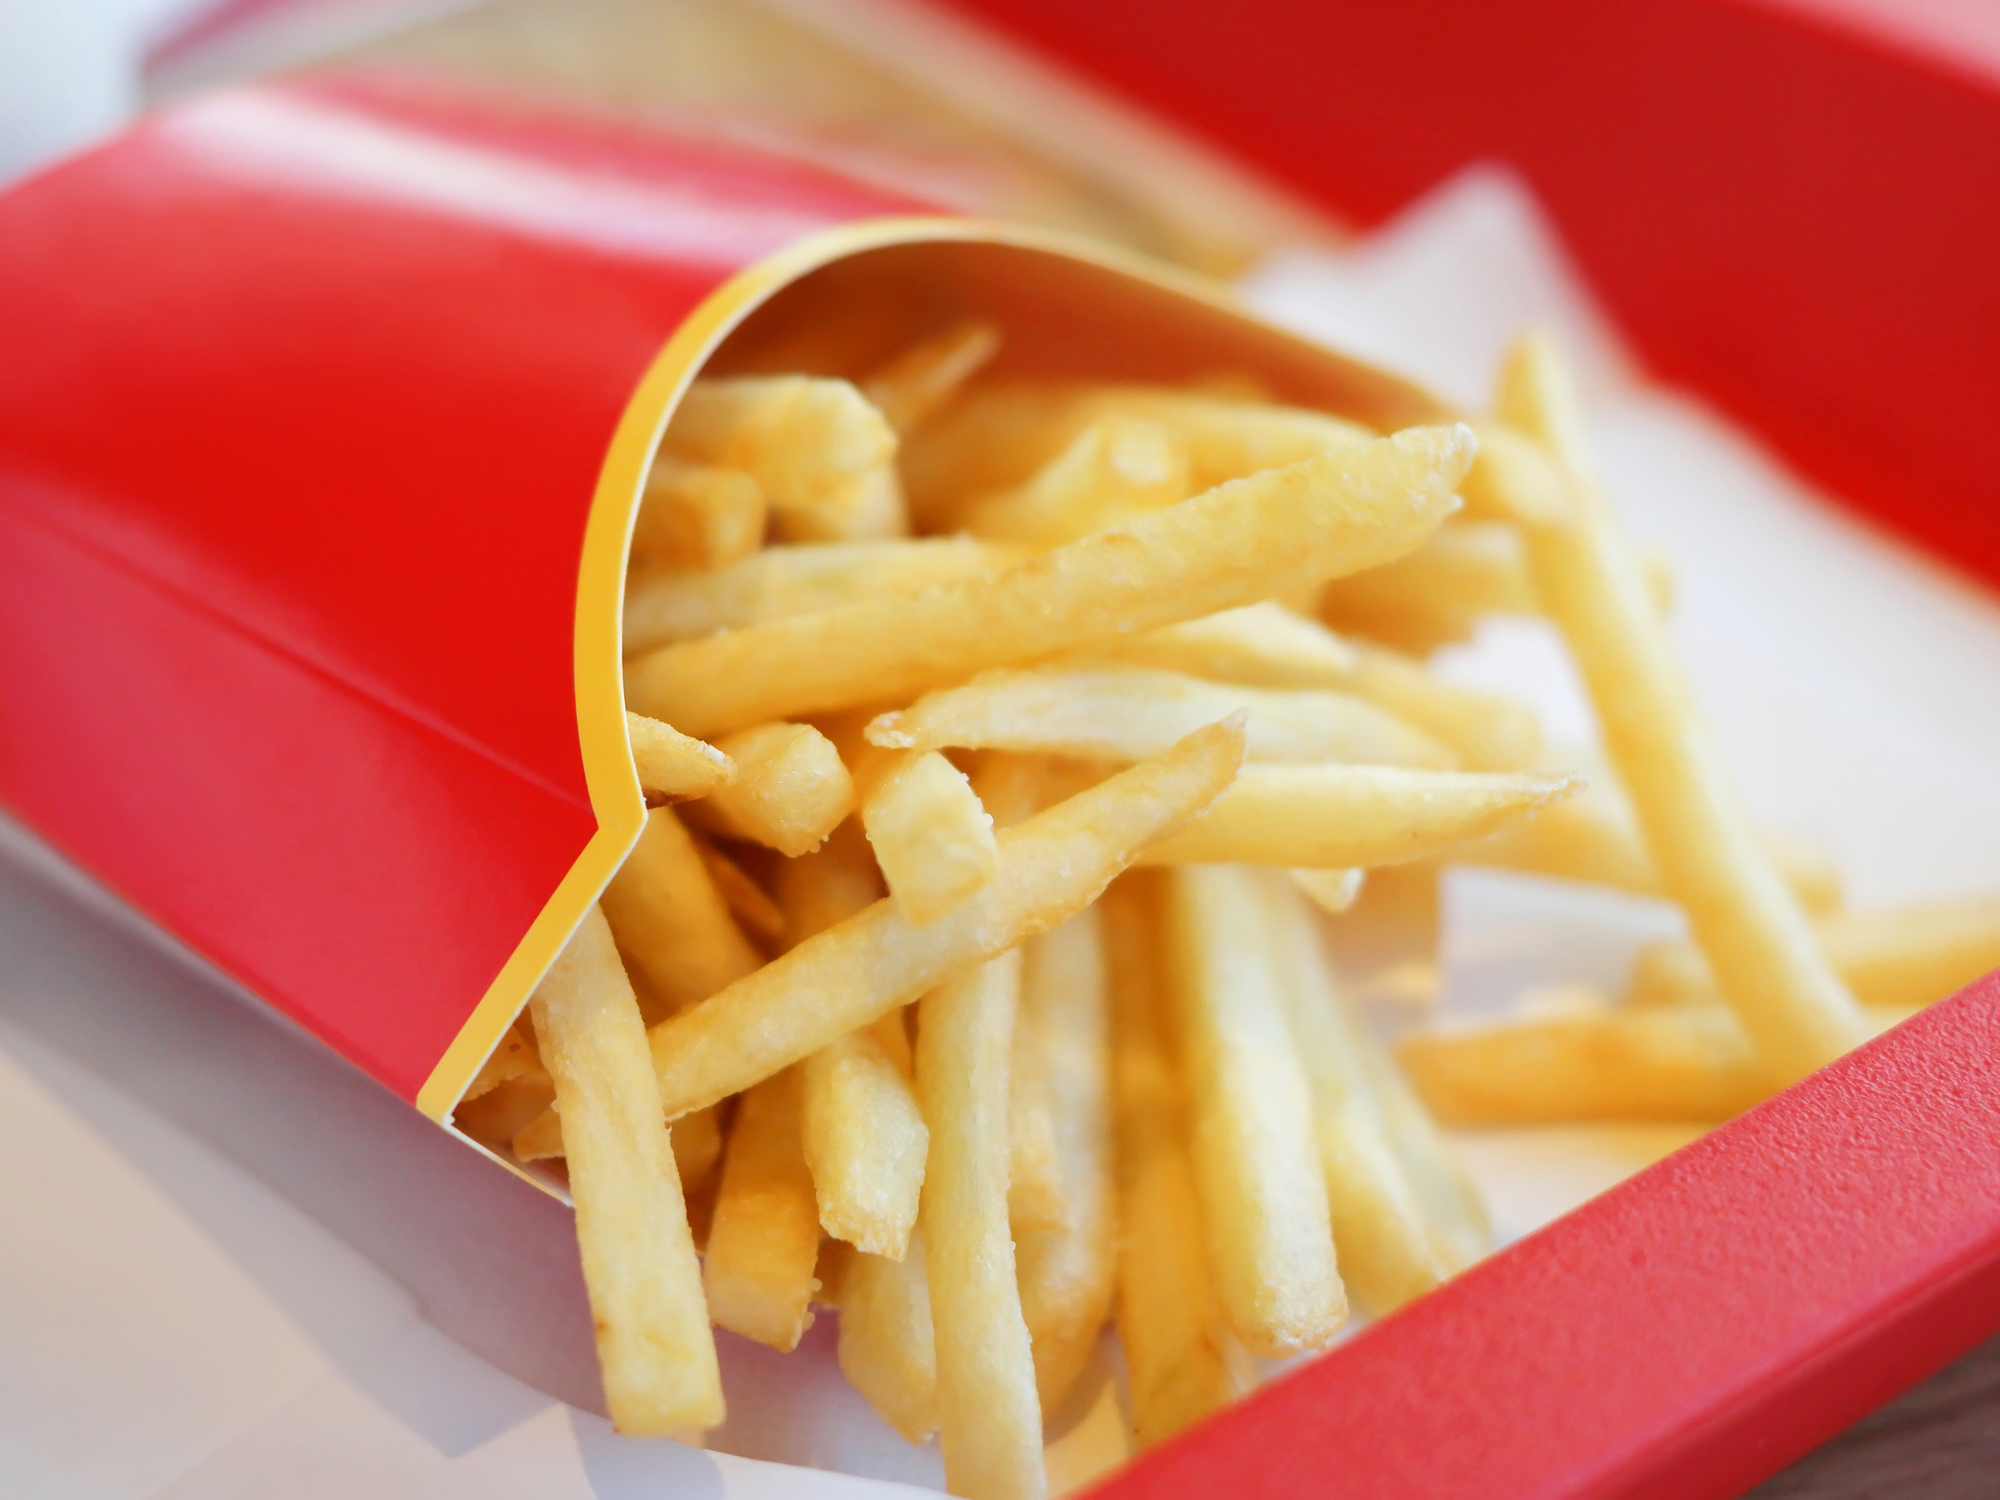 Fast food packaging more dangerous than foods they hold